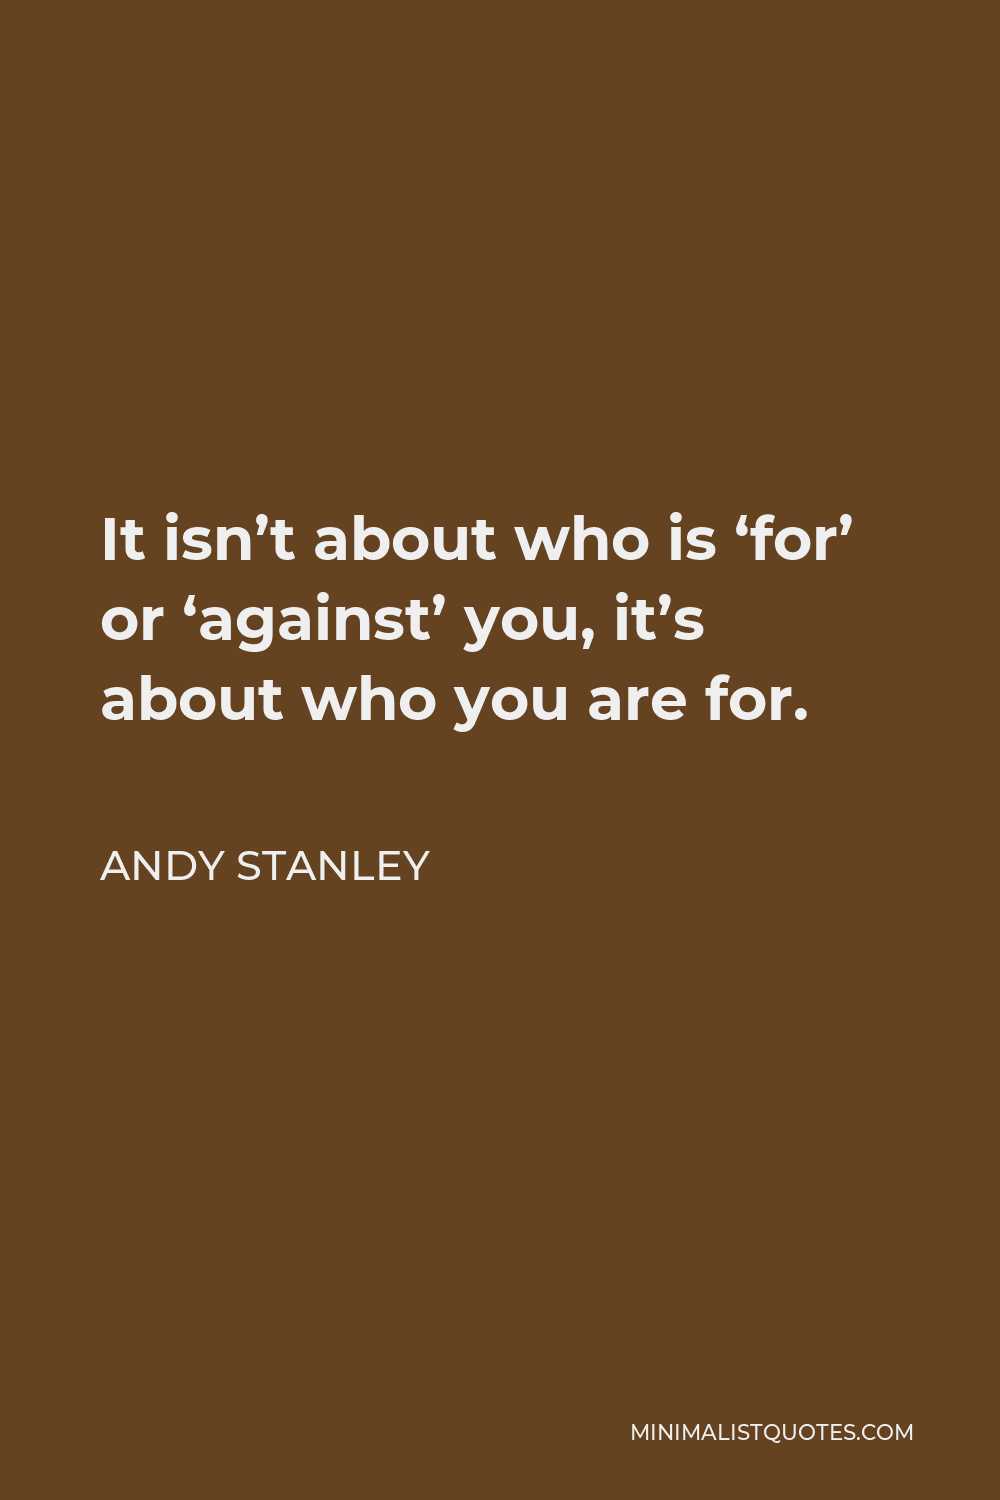 Andy Stanley Quote: It isn't about who is 'for' or 'against' you, it's ...